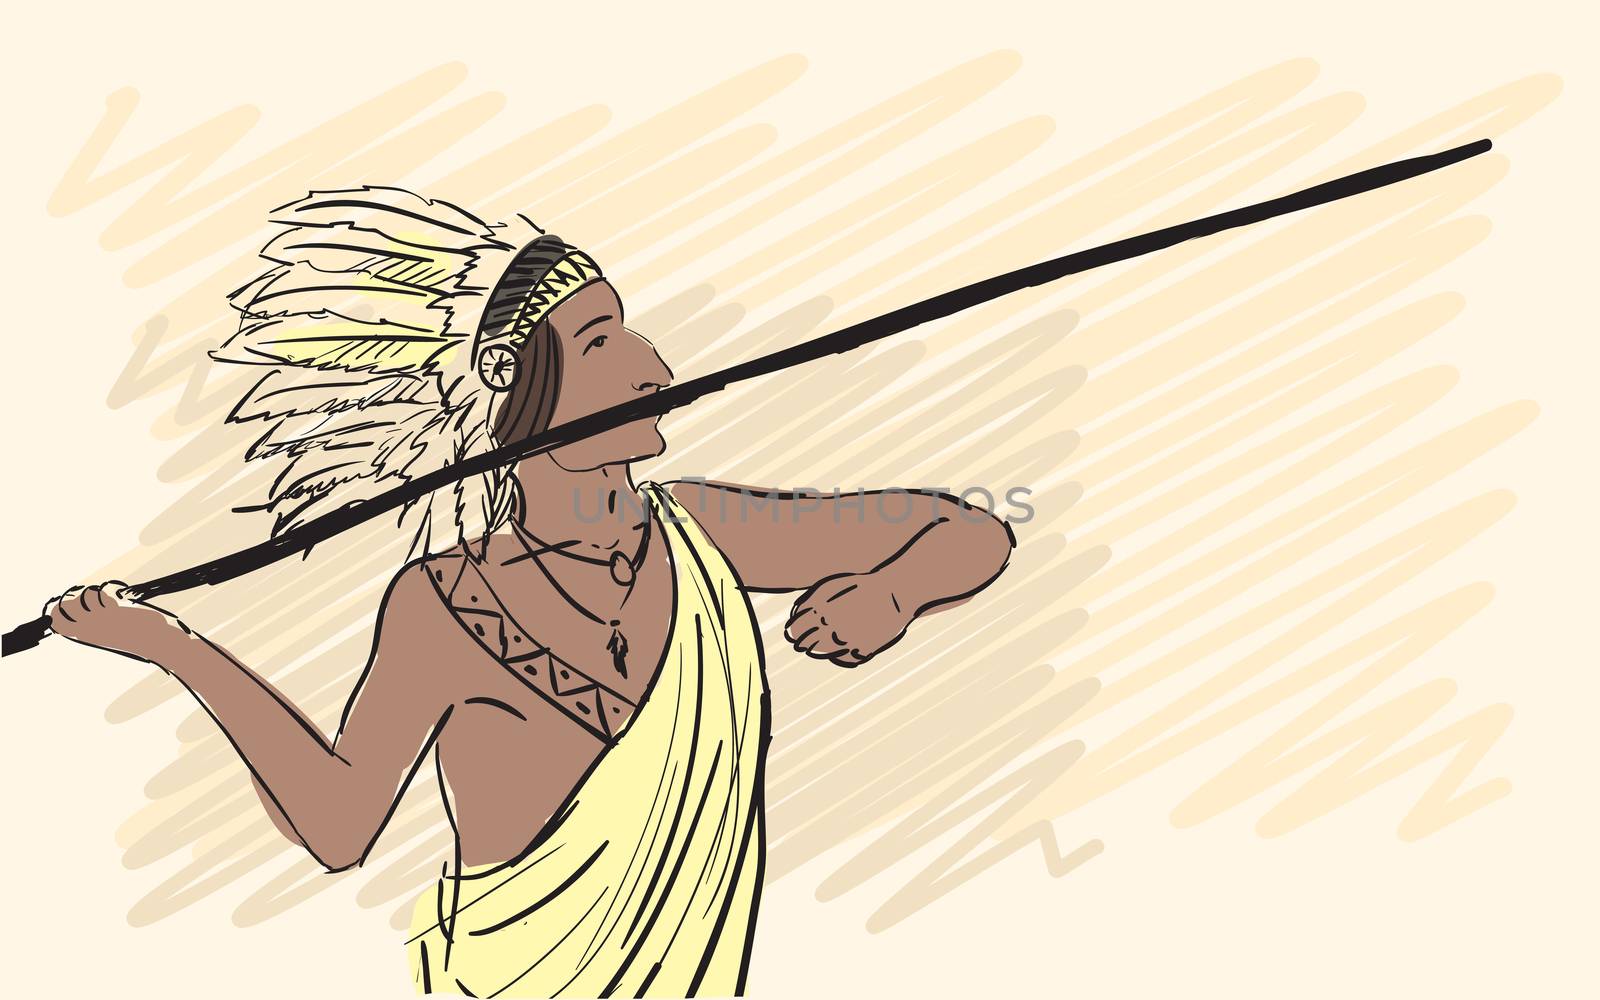 Apache Indian warrior throwing a spear. Corporate identity sketch. by Adamchuk